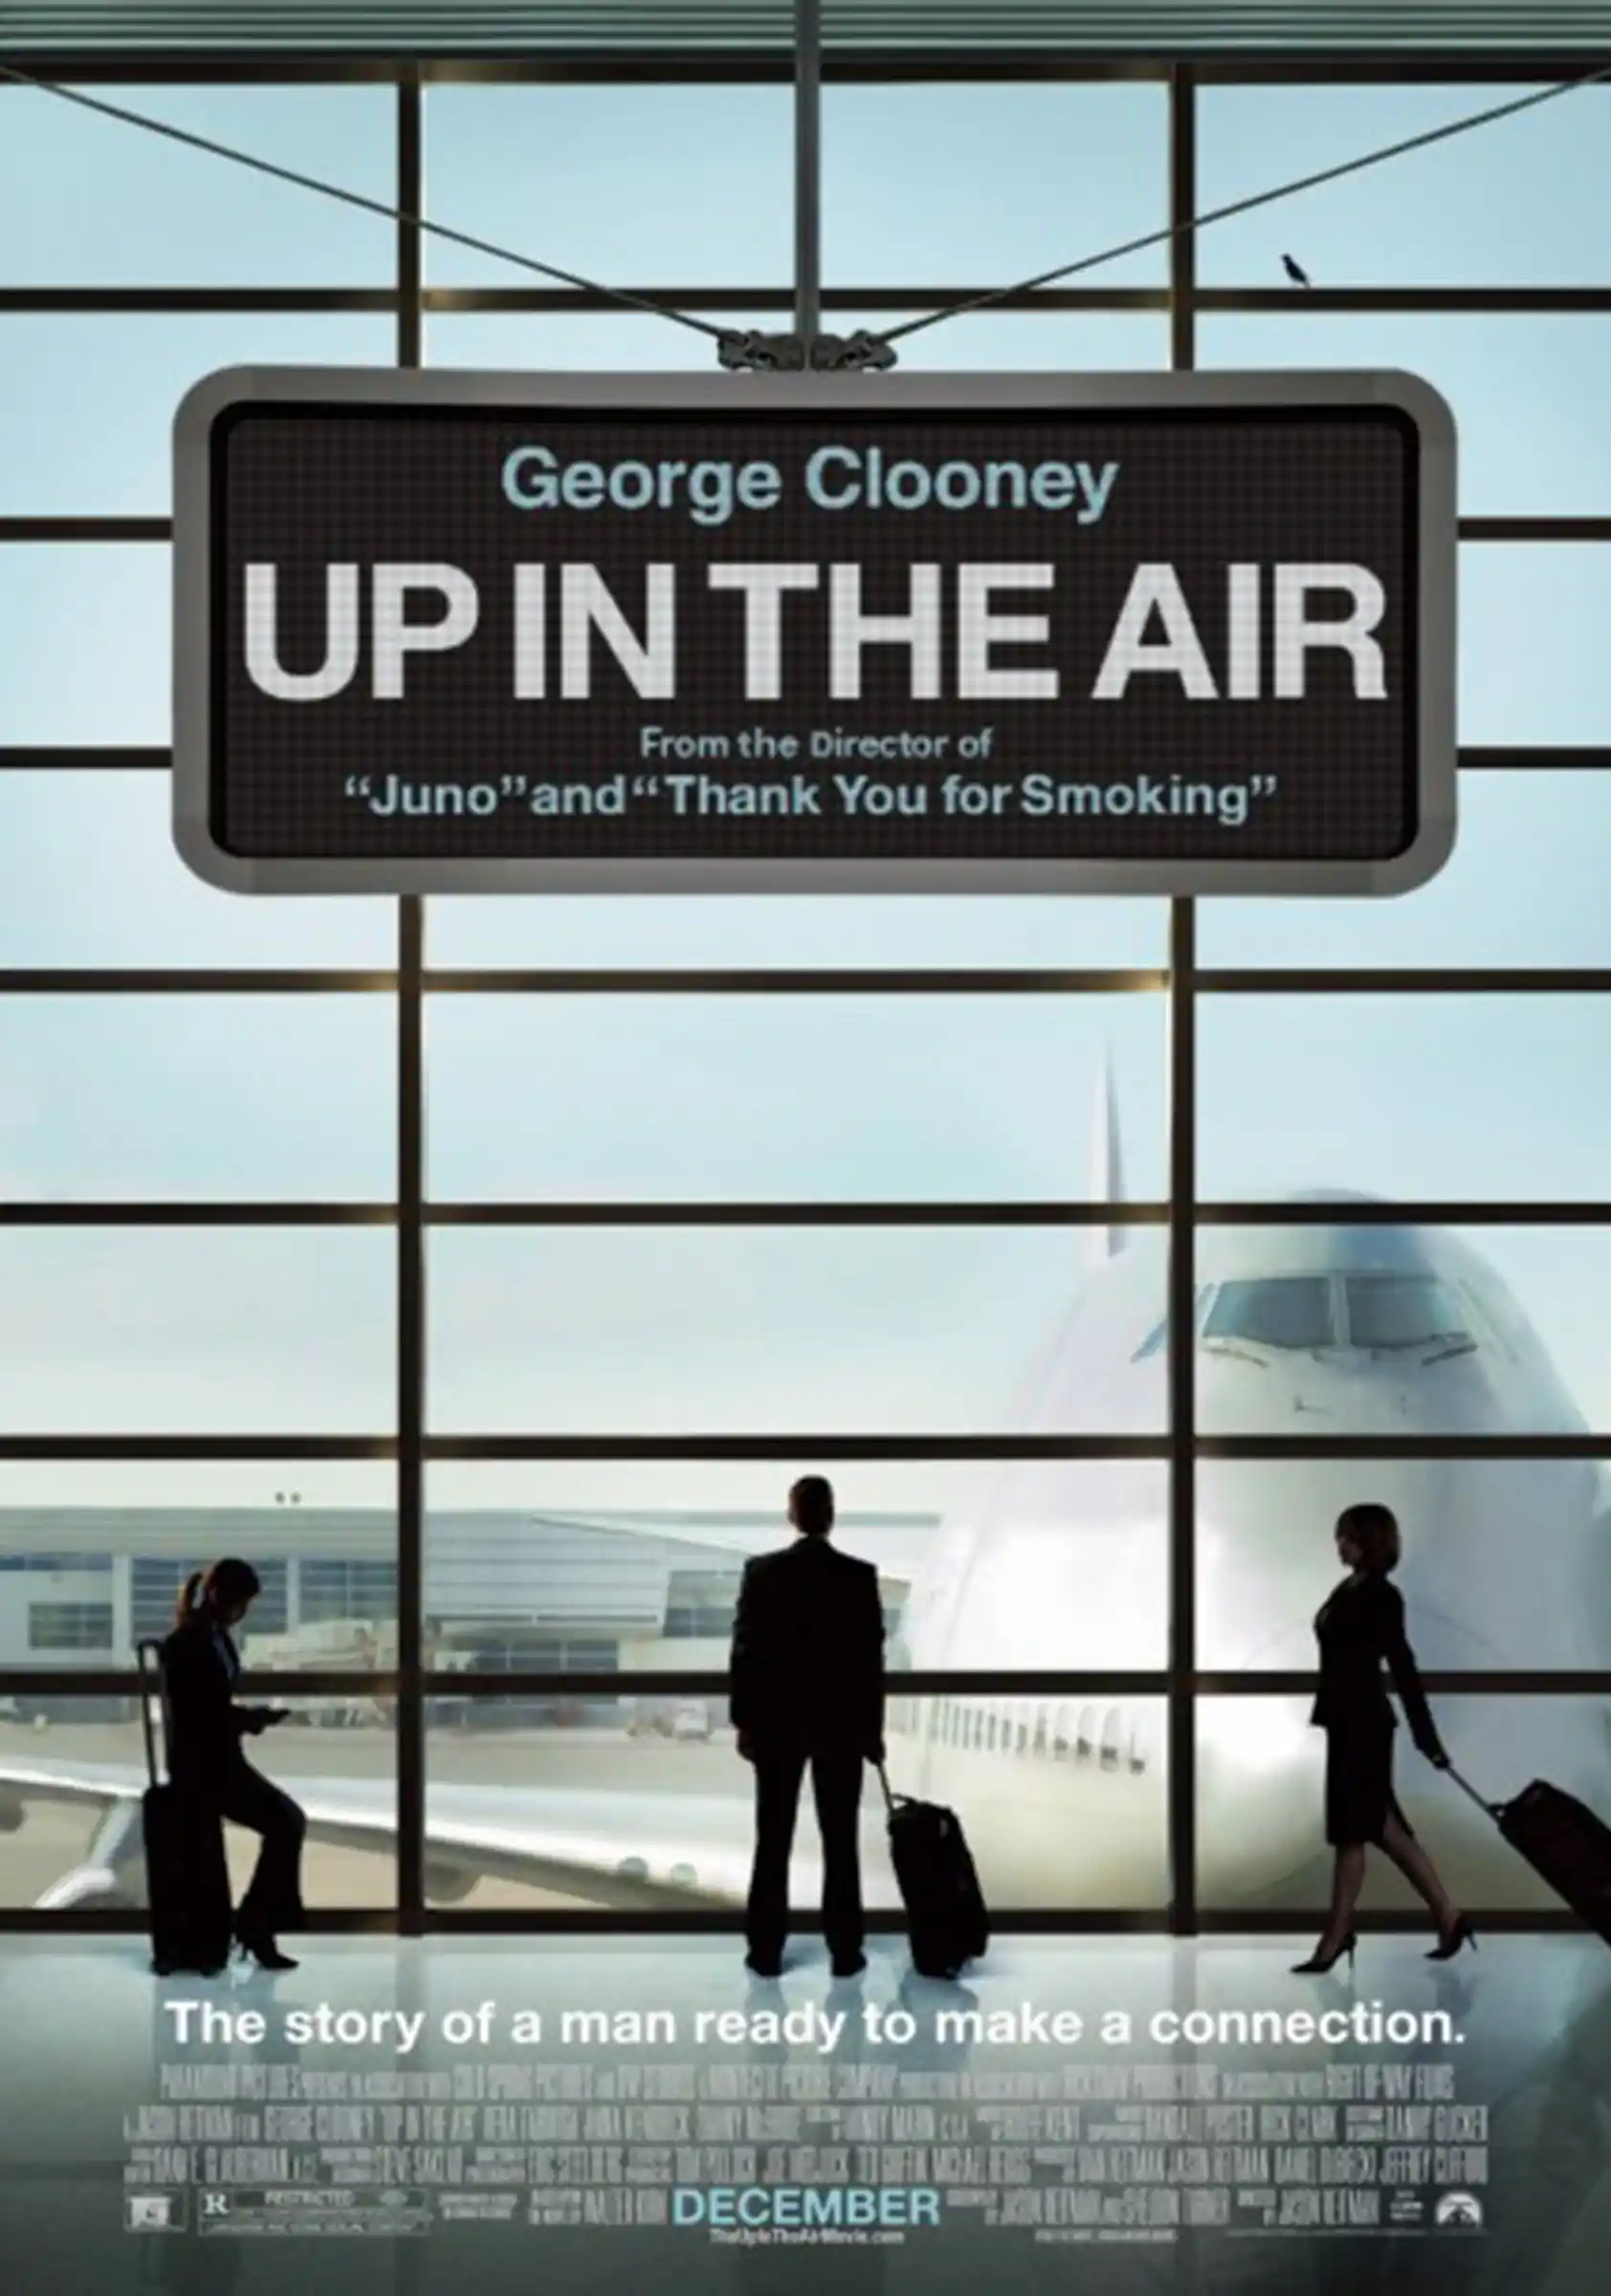 Up in the Air movie poster for HR leaders